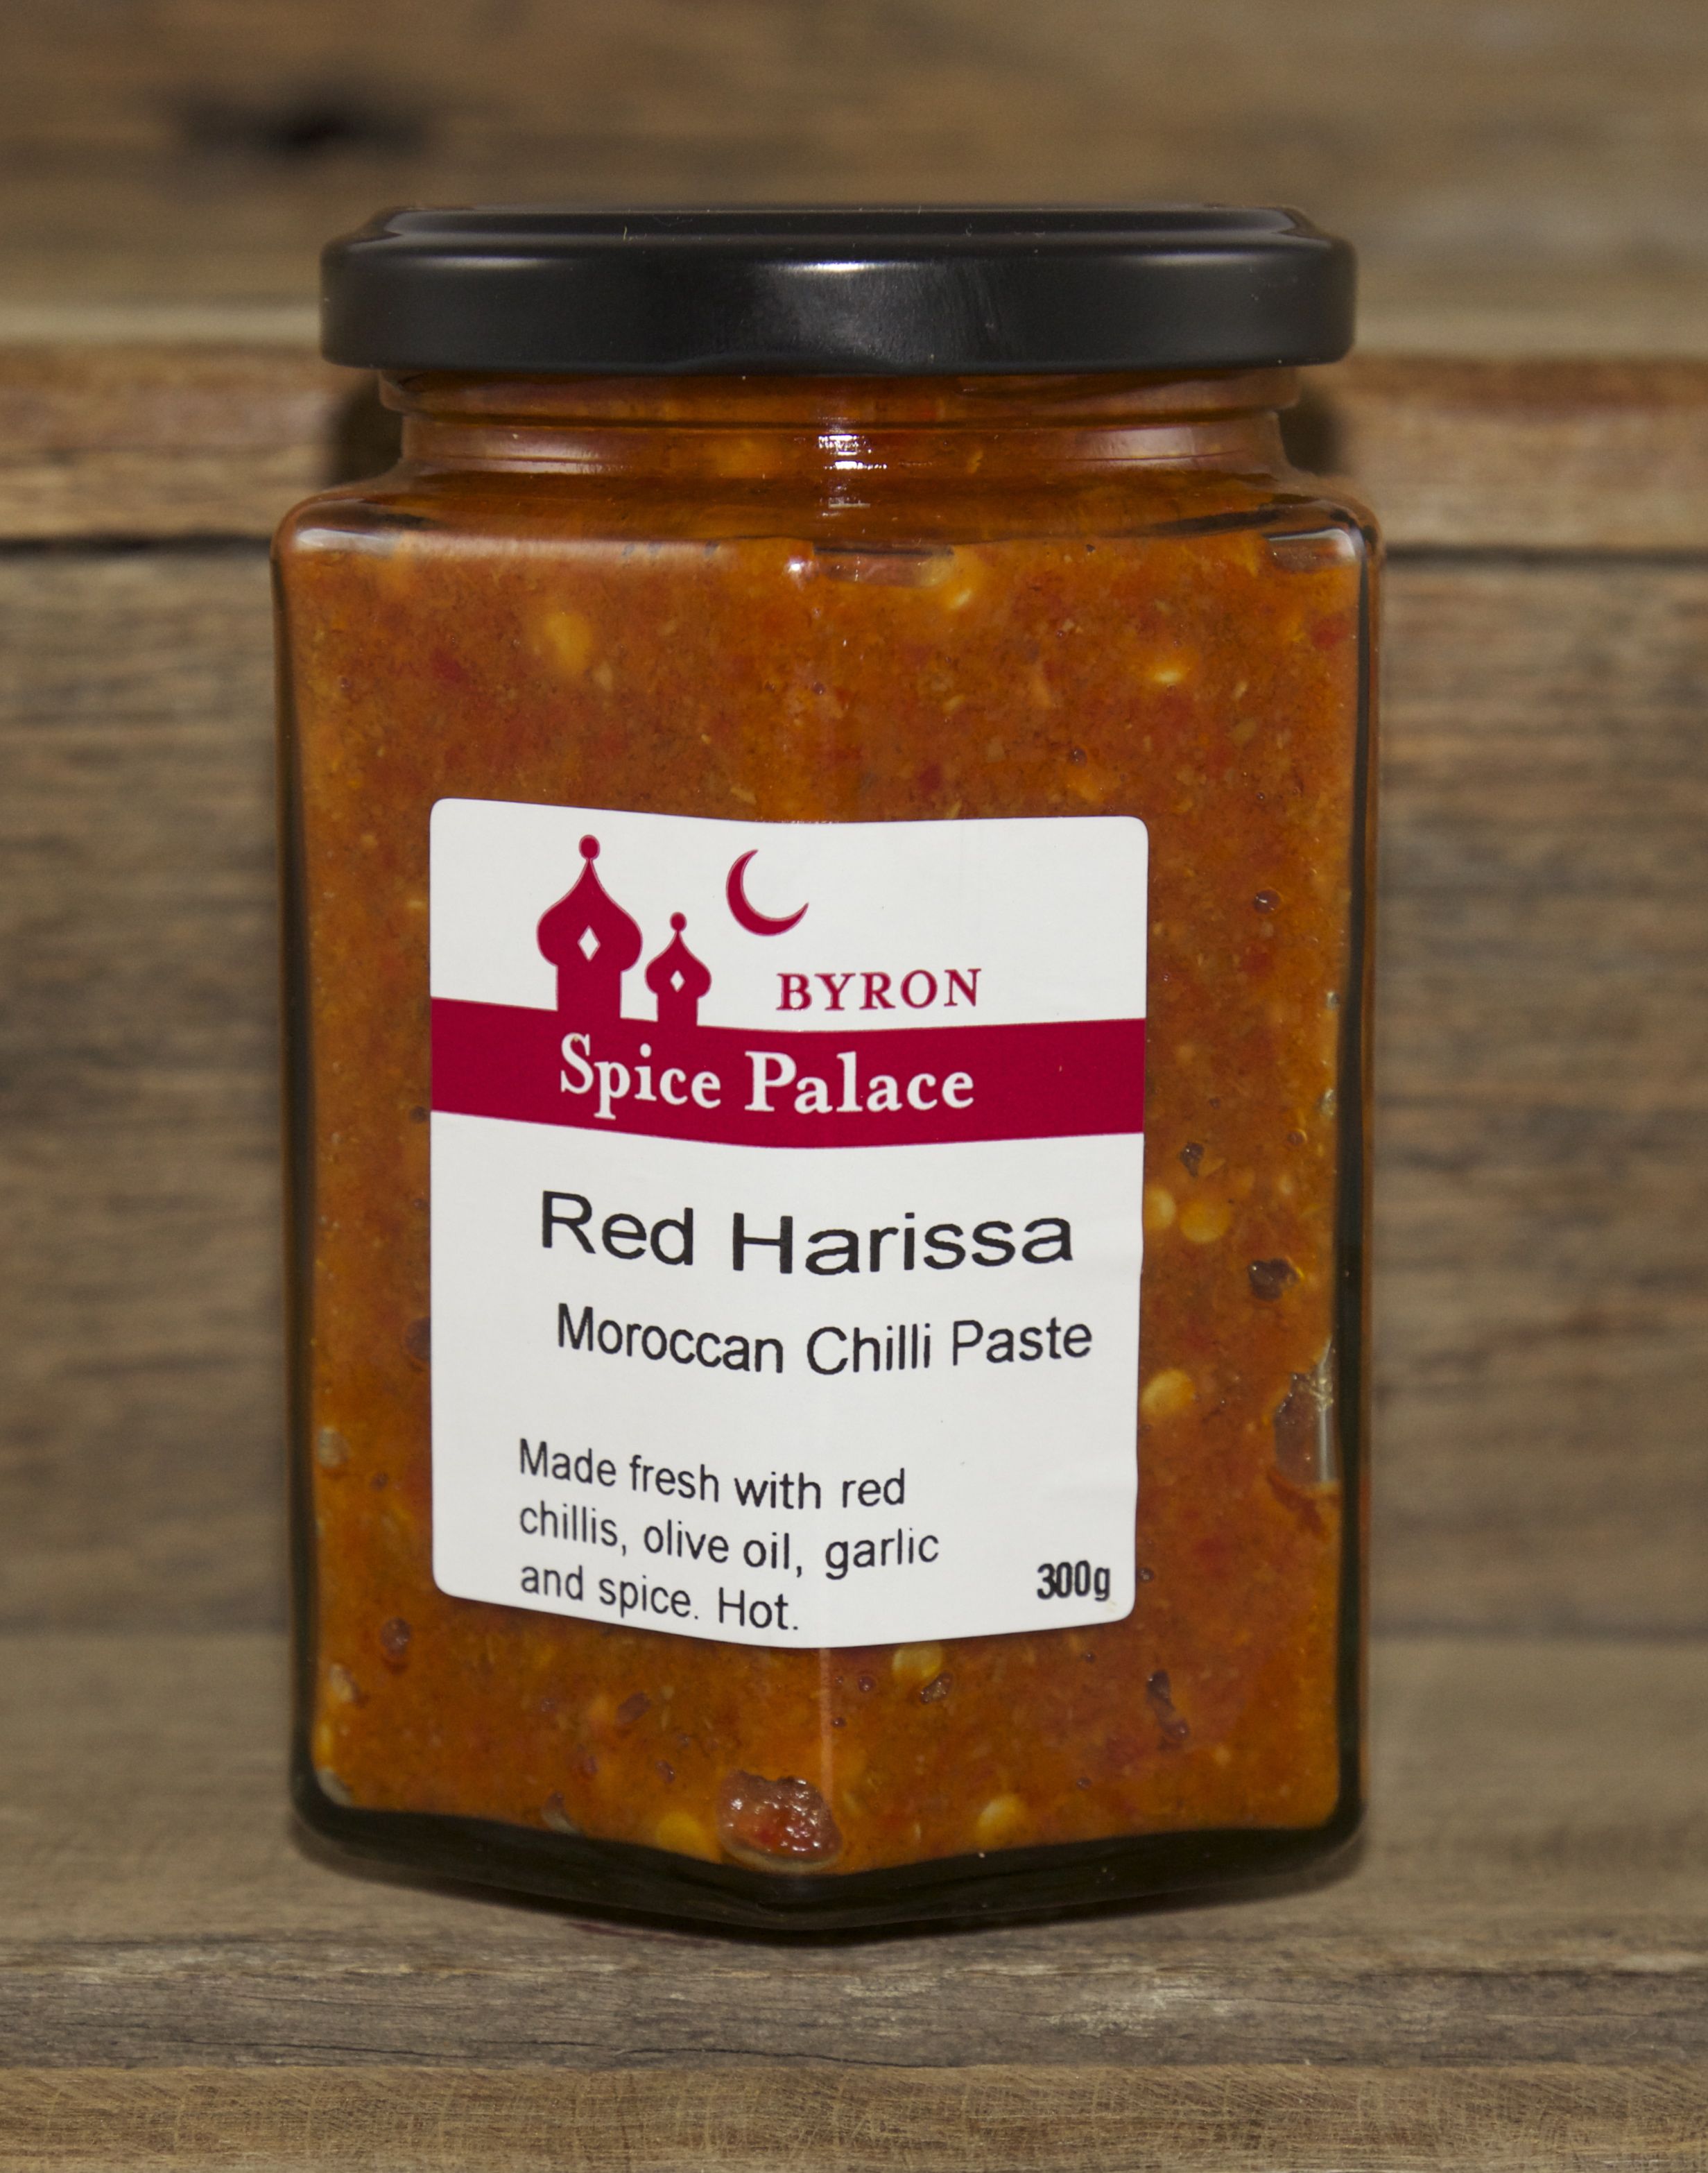 Red Harissa Chilli Paste - Spice Palace